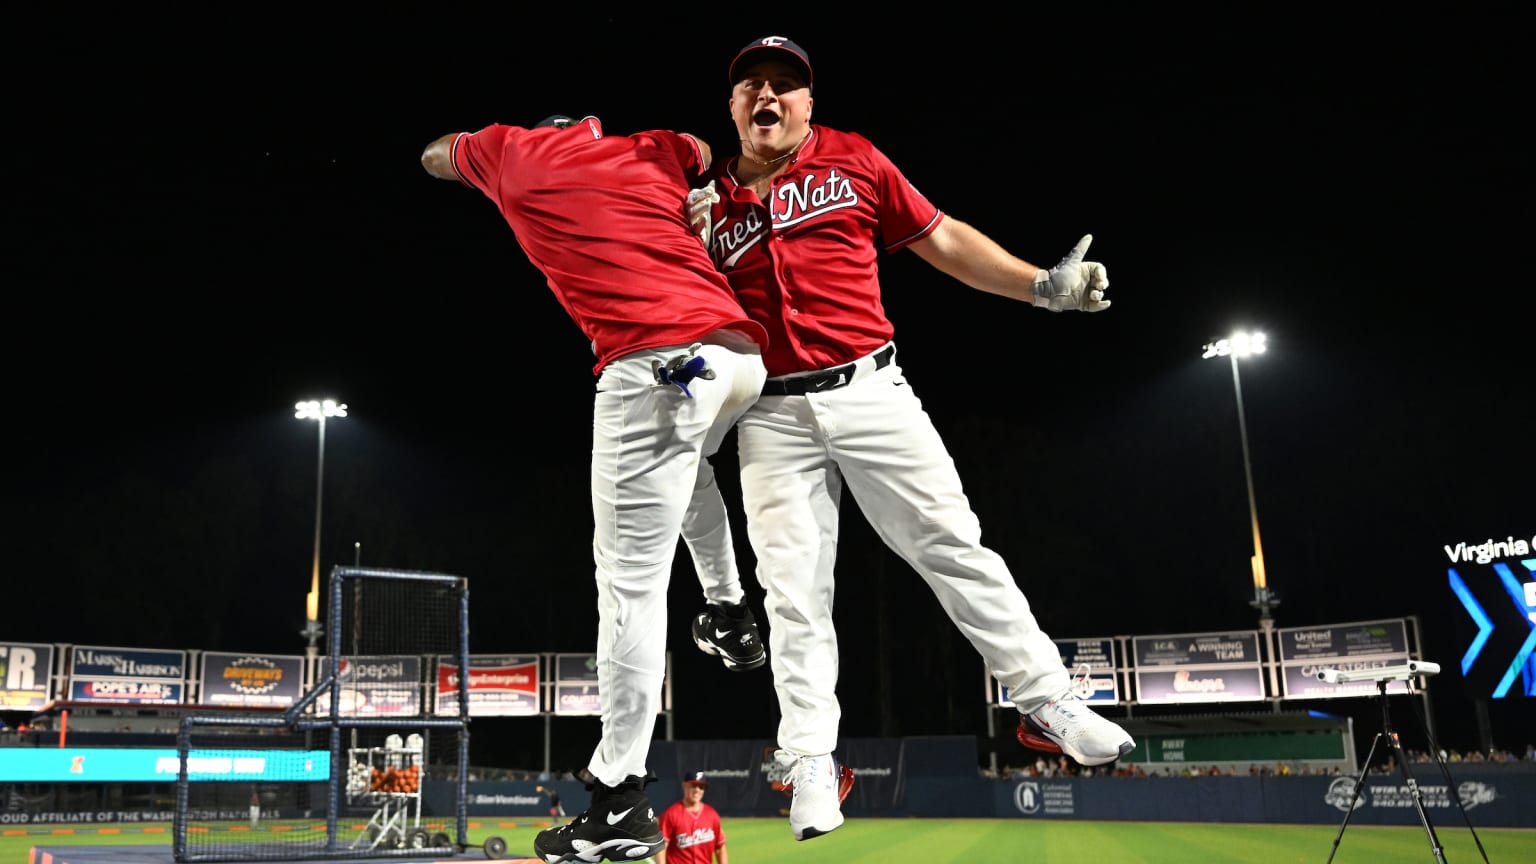 Two players celebrate near home plate